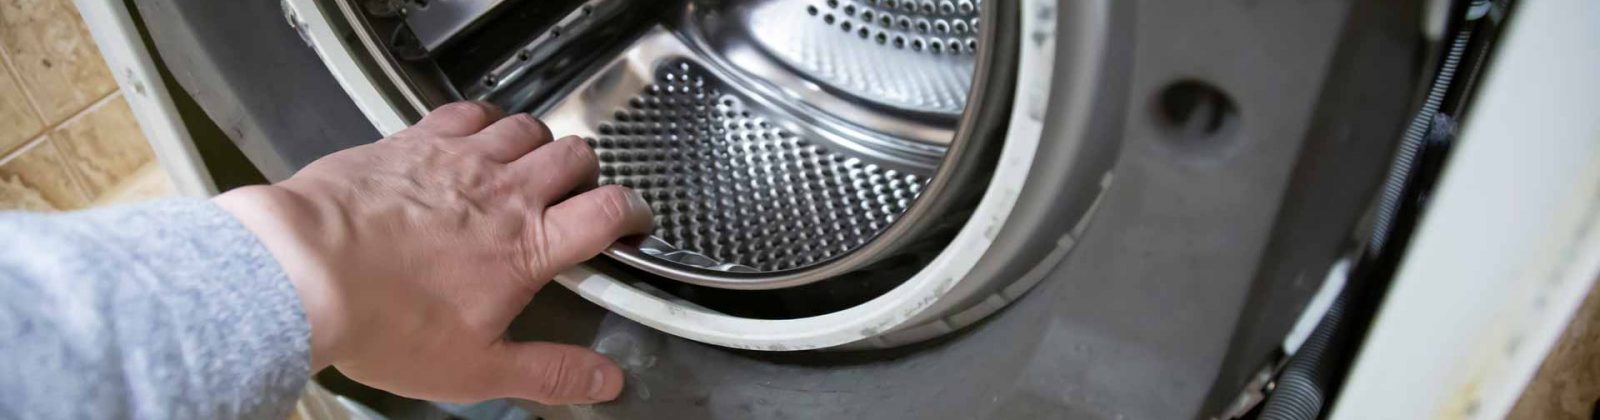 Hand of appliance repair technician reaching in to washer/dryer drum